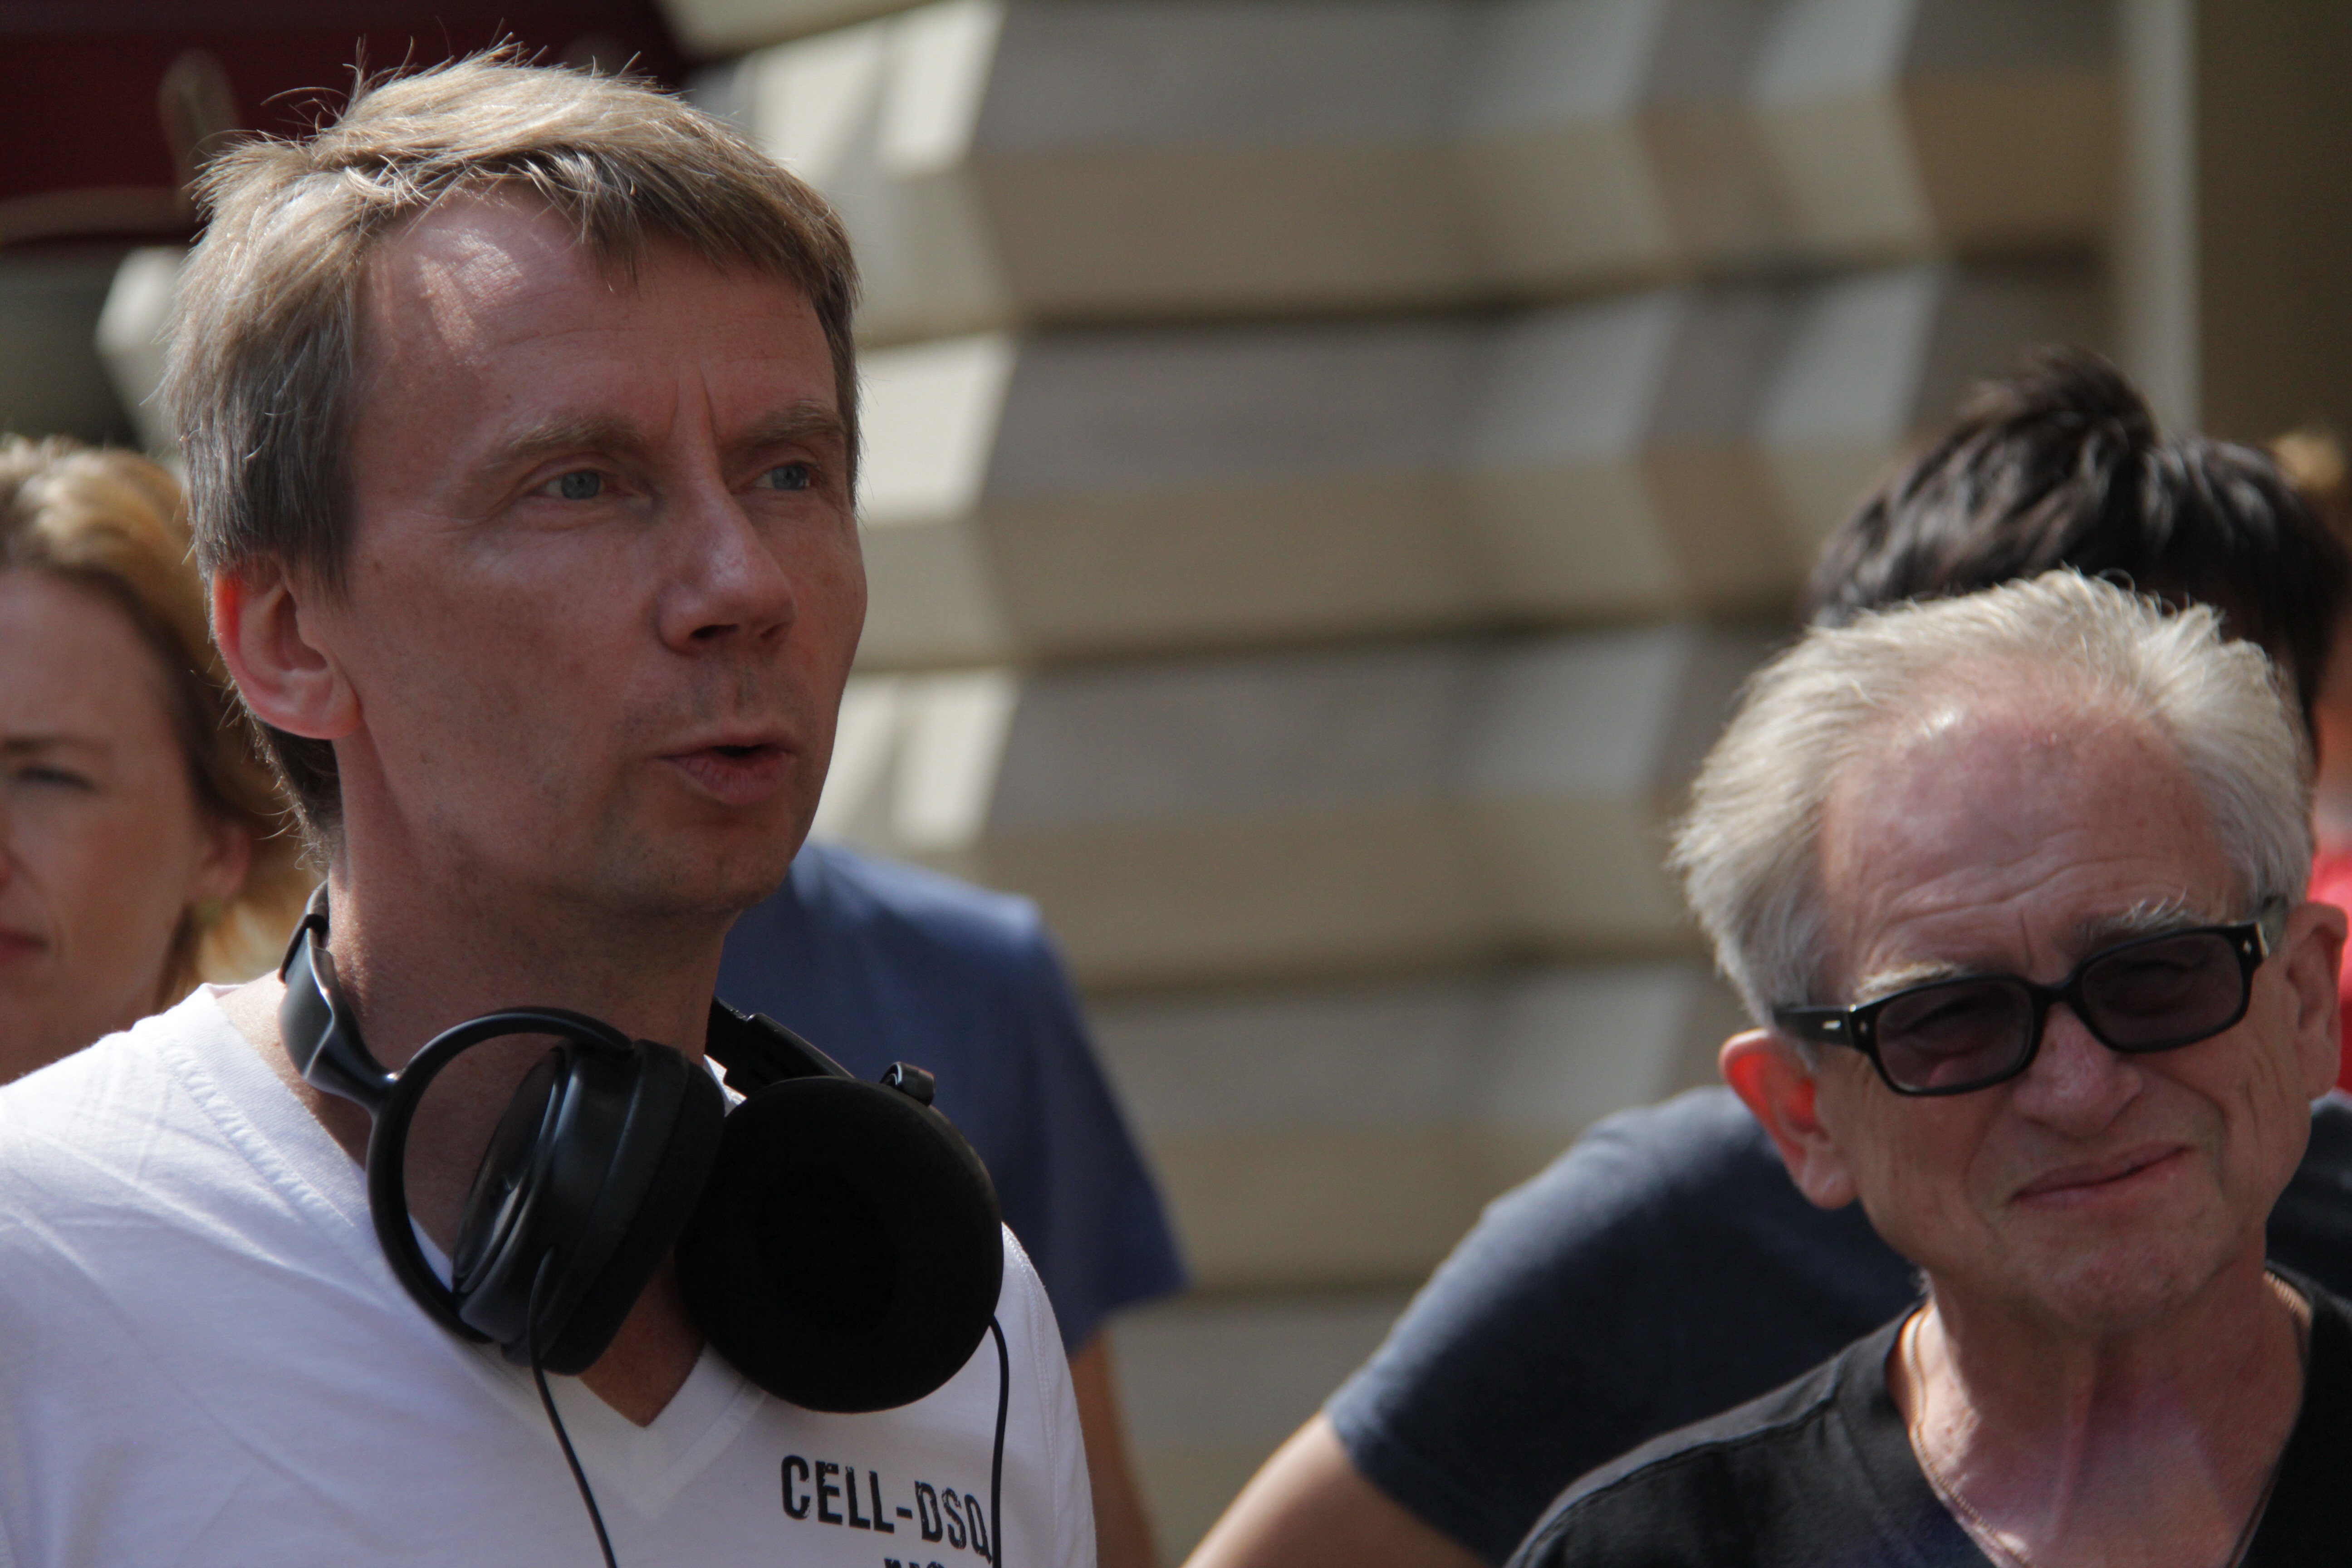 Slava N. Jakovleff and John S. Bartley on the set of Insomnia (Moscow August, 2015)